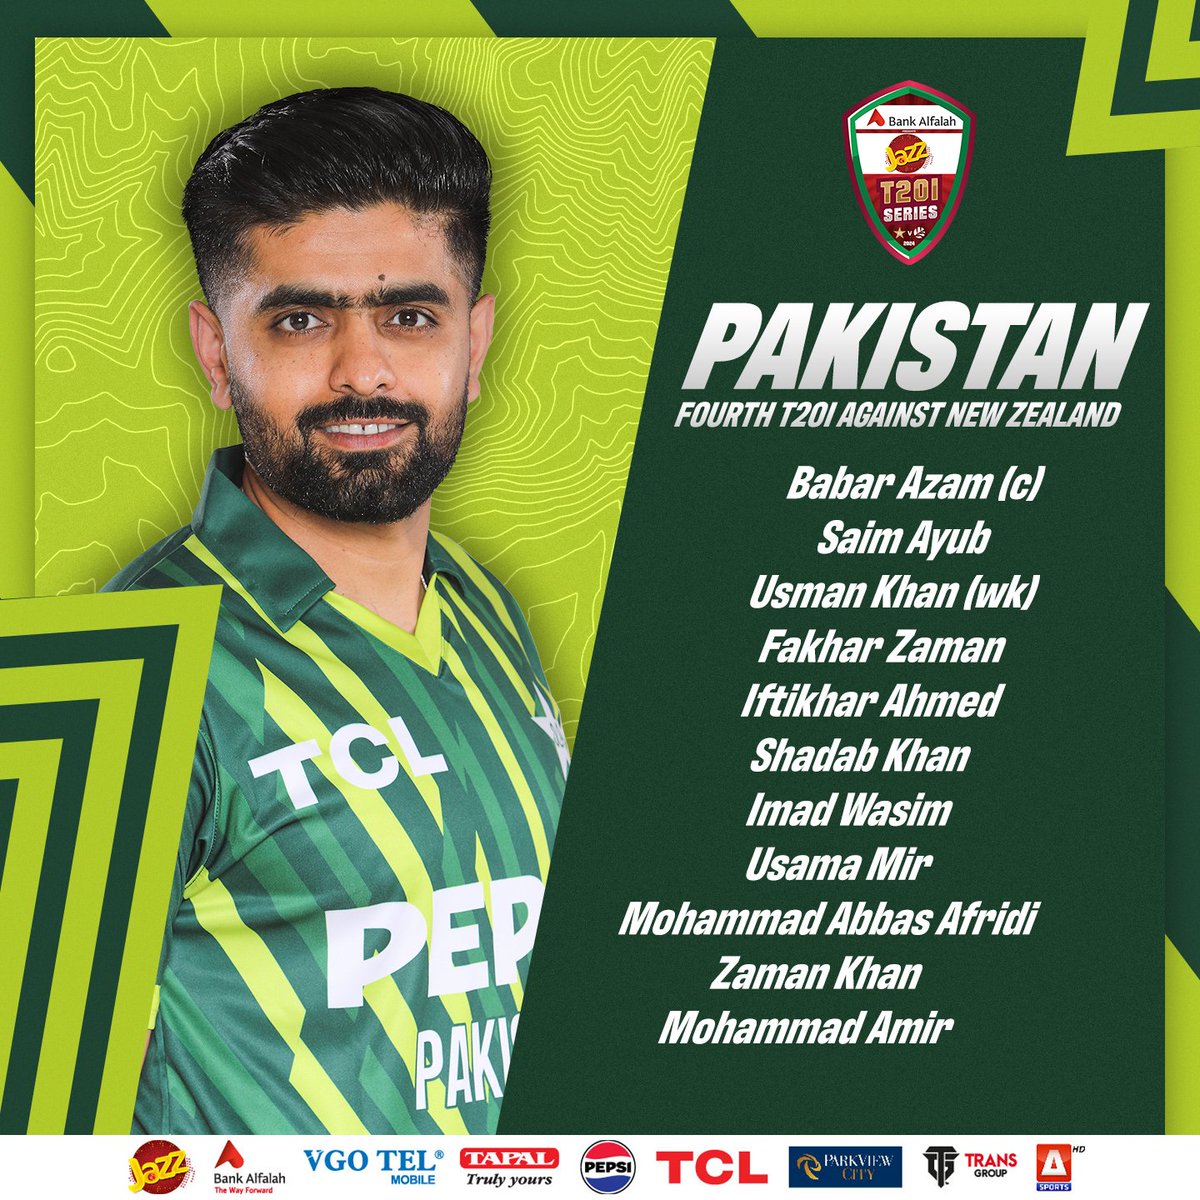 Five changes to our playing XI for the fourth T20I 👇 #PAKvNZ | #AaTenuMatchDikhawan